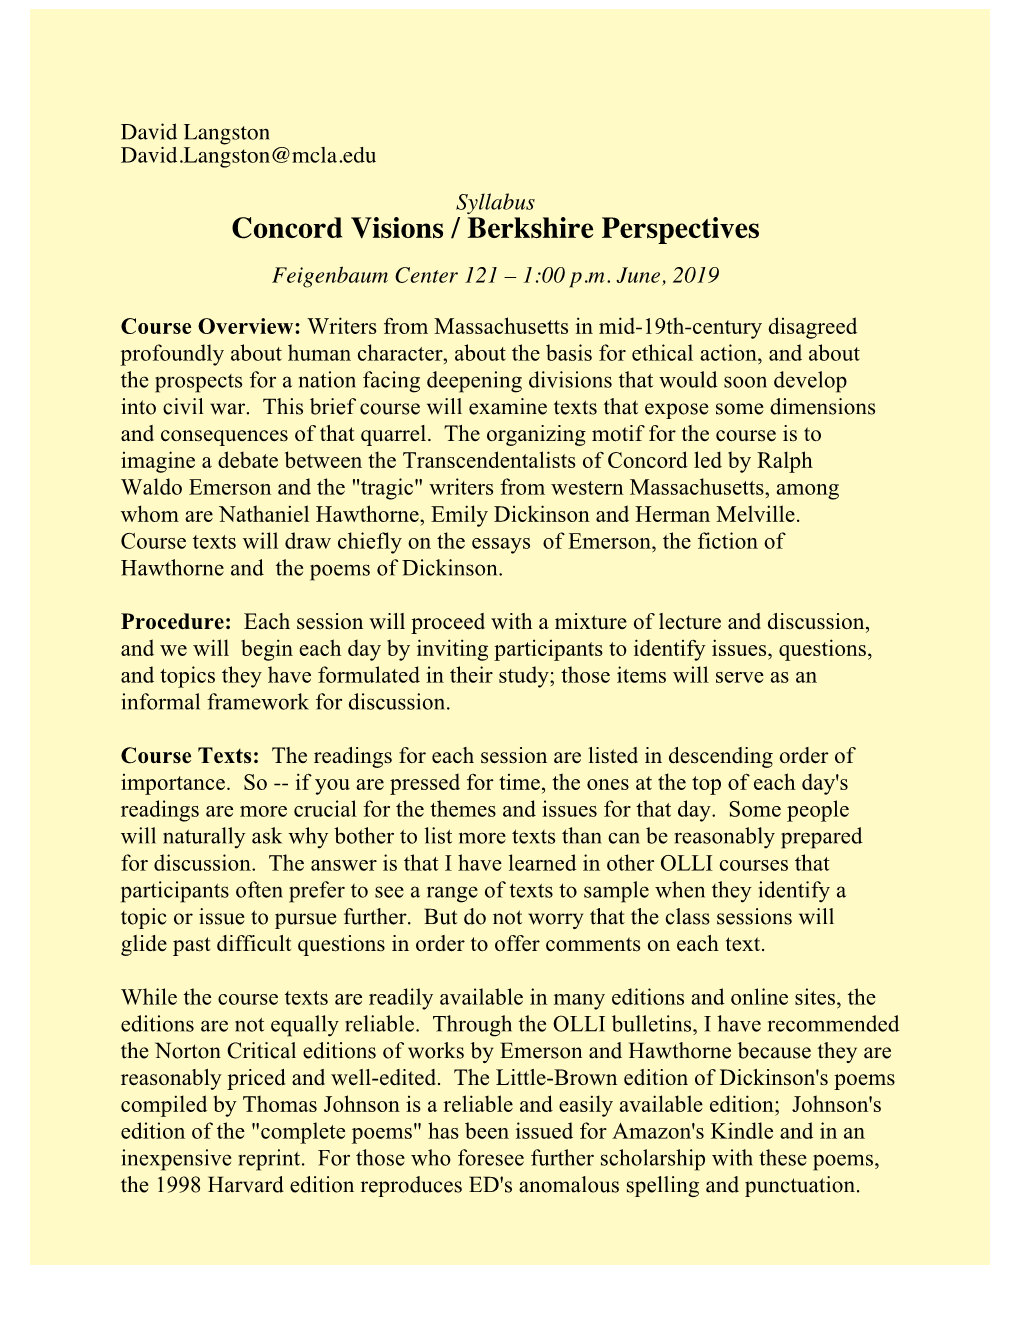 Concord Visions / Berkshire Perspectives